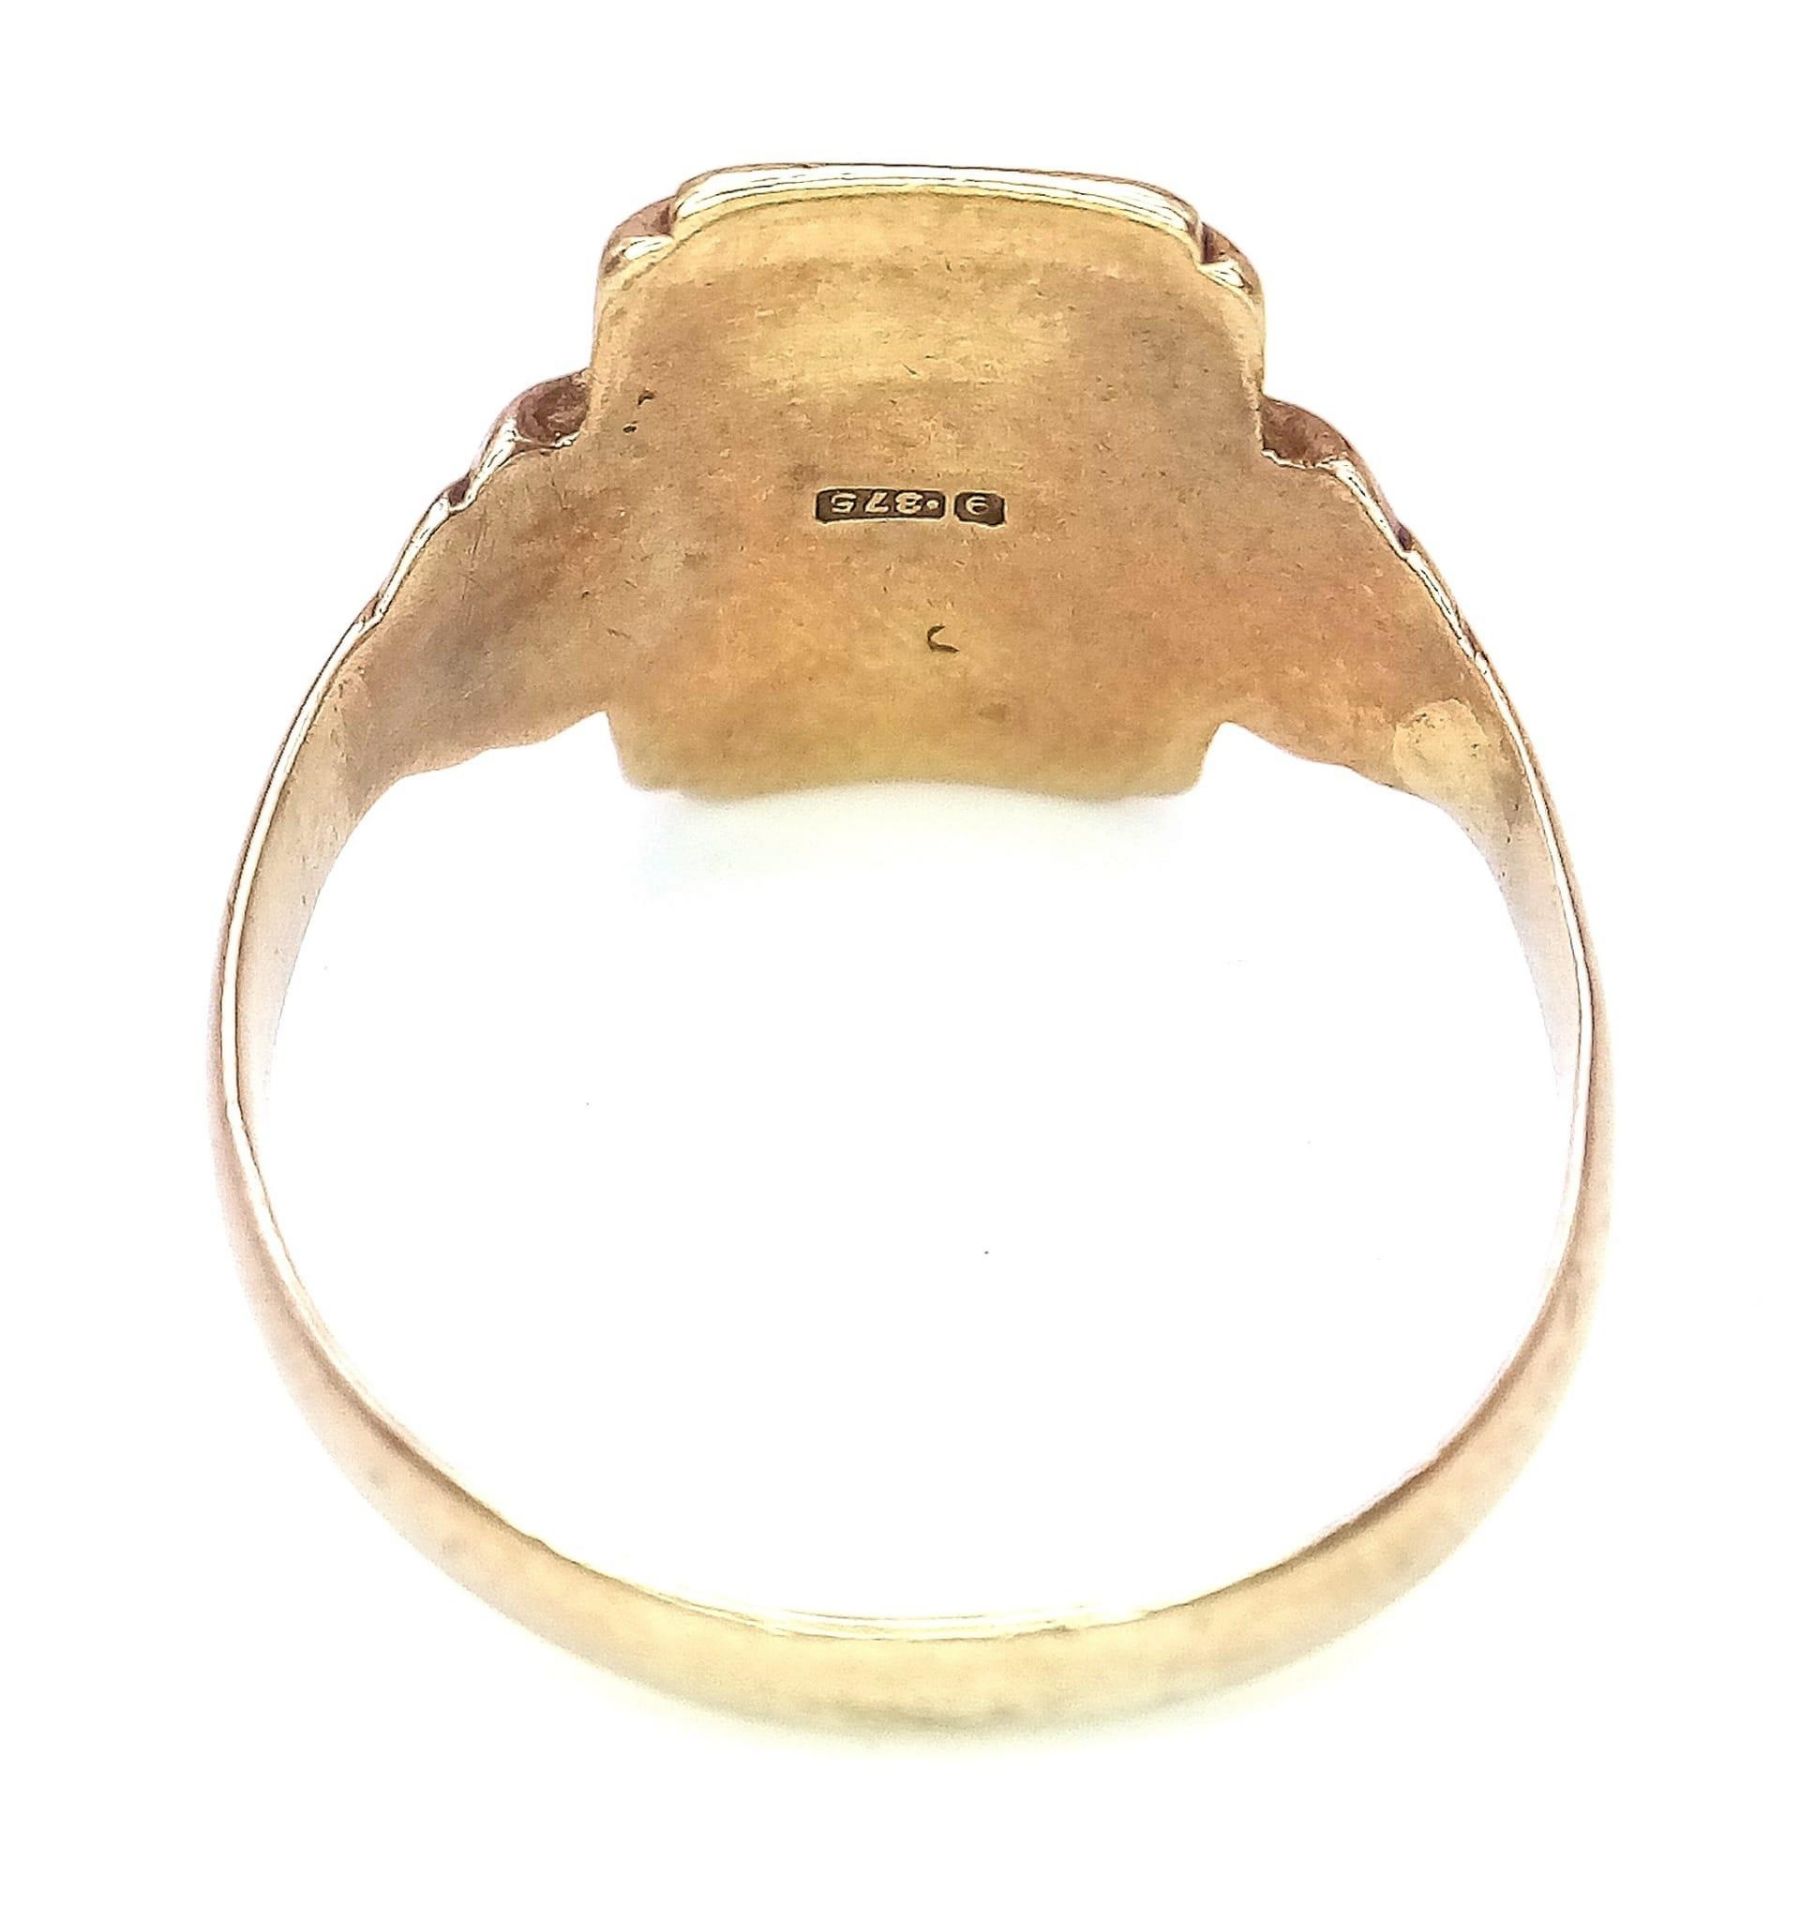 A Vintage 9K Yellow Gold Signet Ring. Full UK hallmarks. Size S. 3.93g weight. - Image 5 of 6